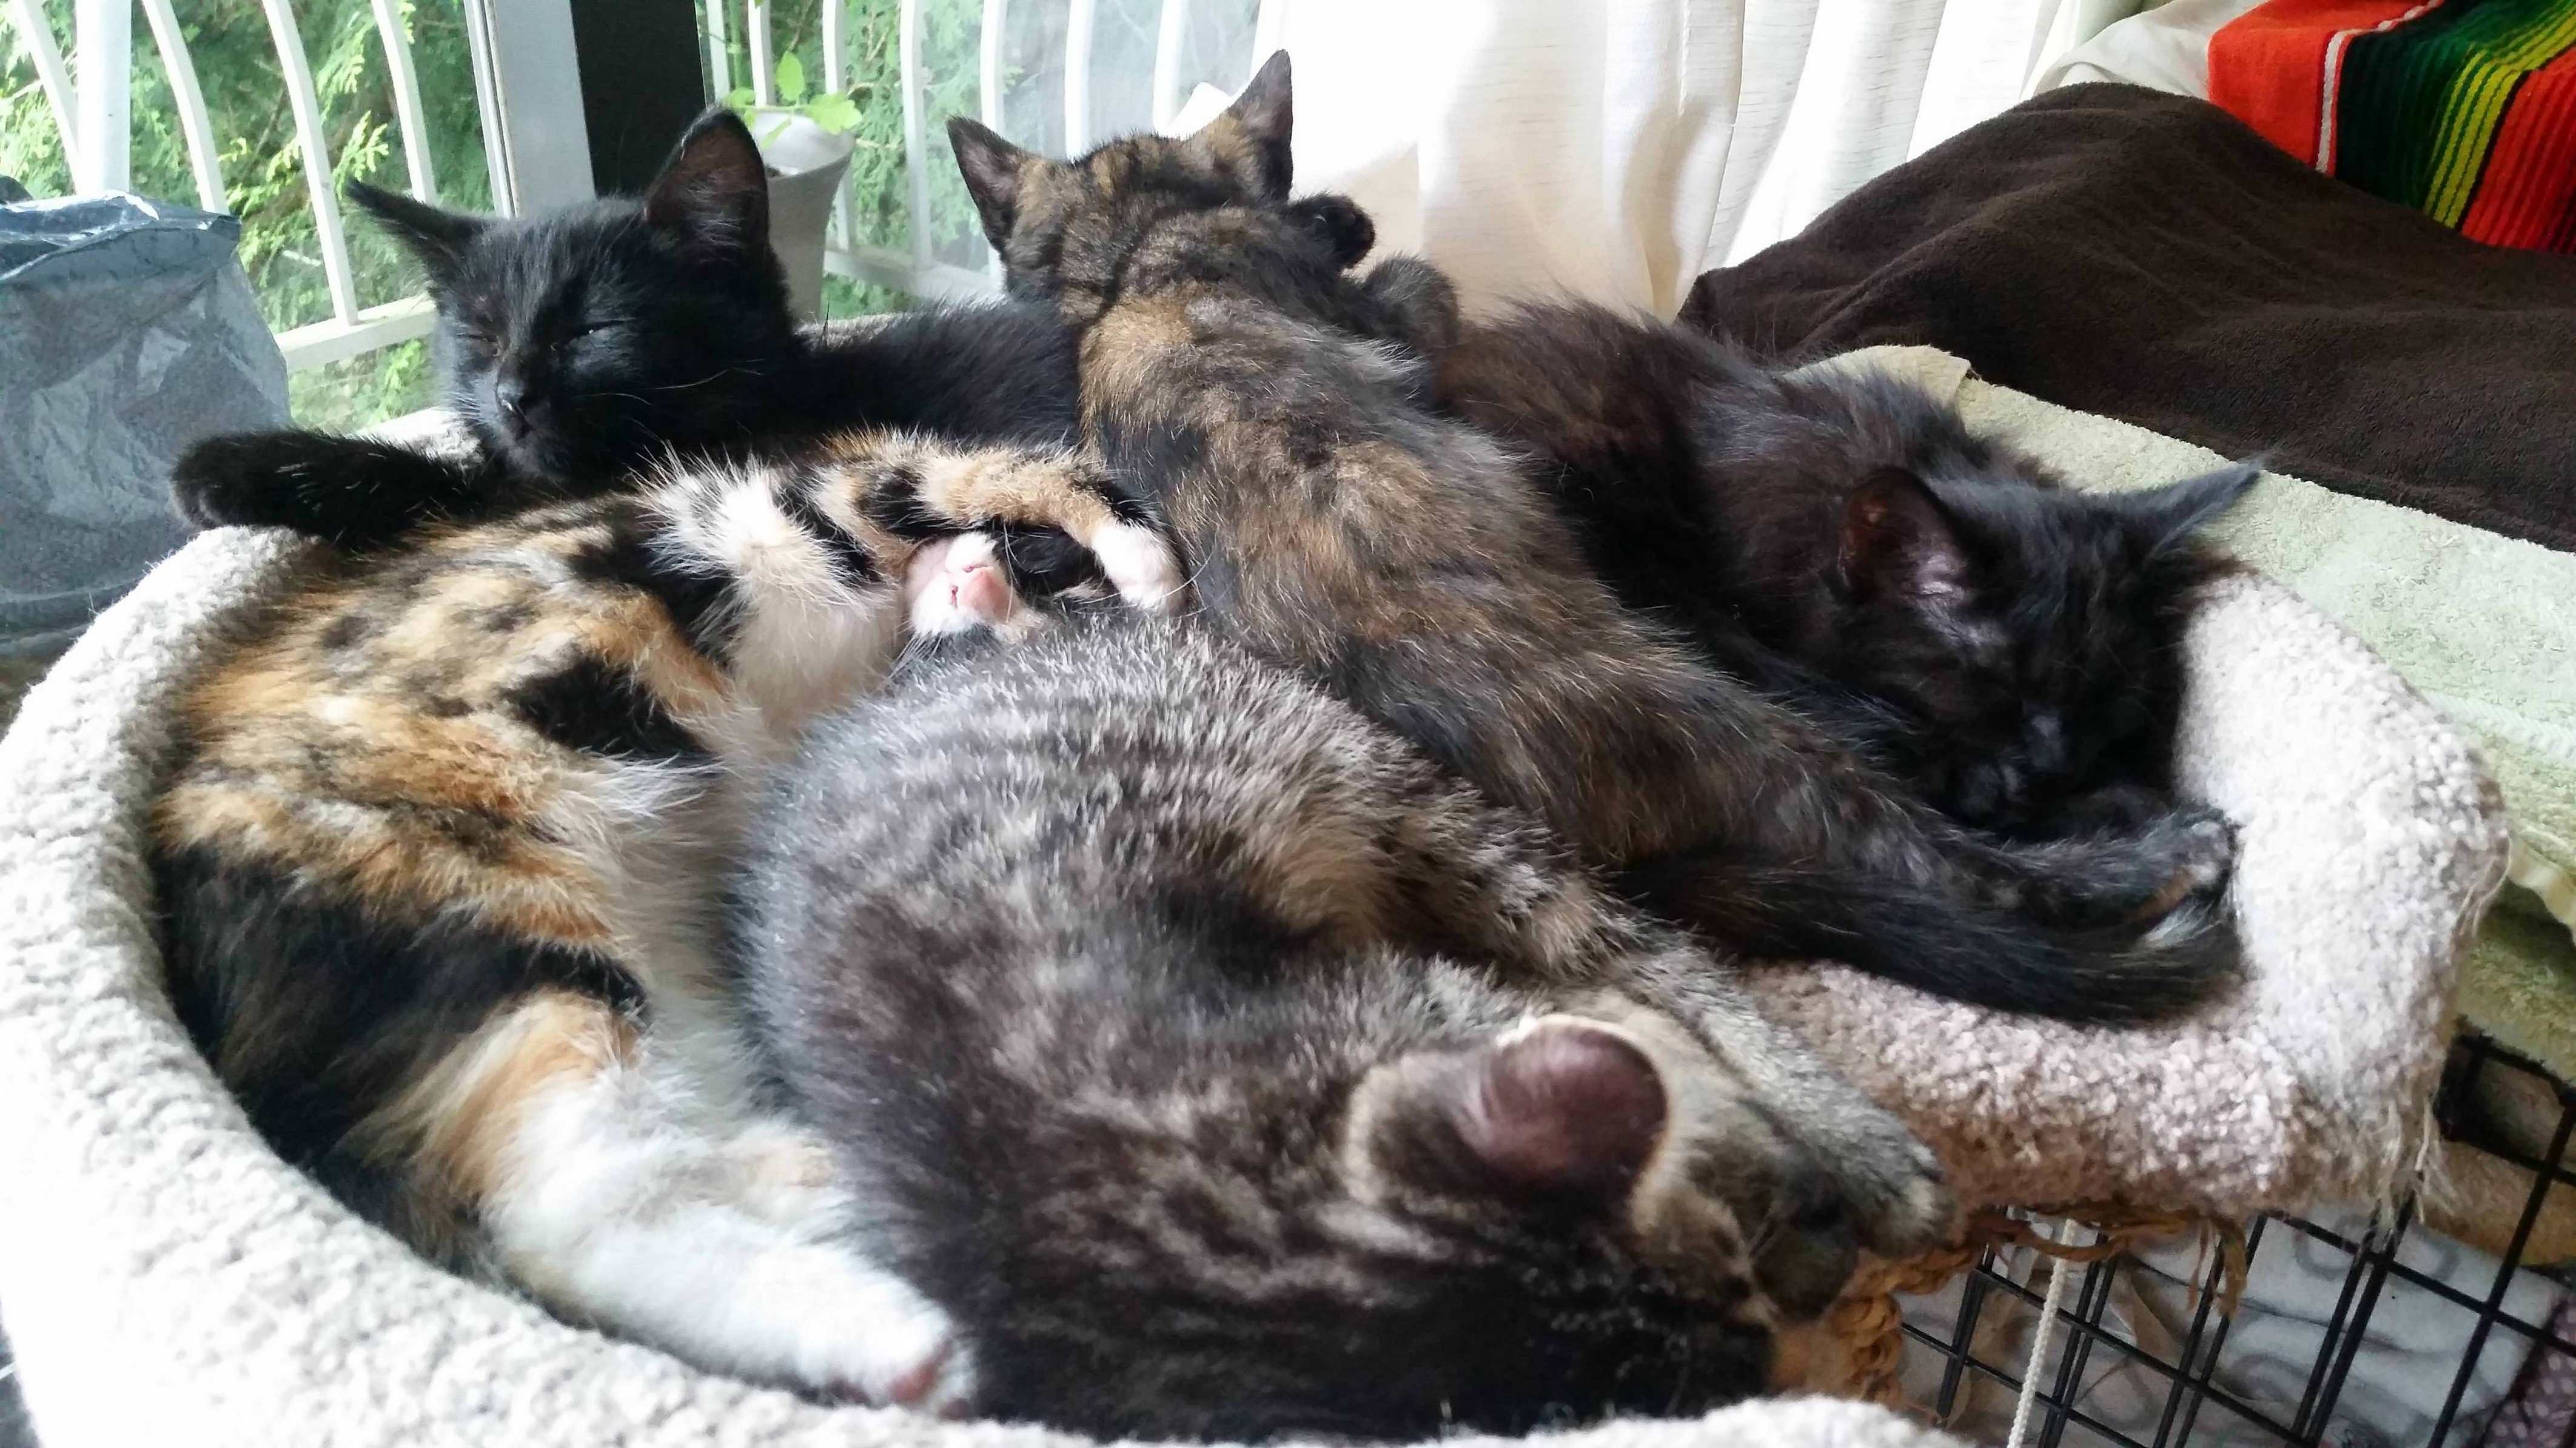 I got my kitten as a foster from a cruelty case with her four siblings two years ago. figured their ritual noontime cuddlepuddle would be welcomed here.